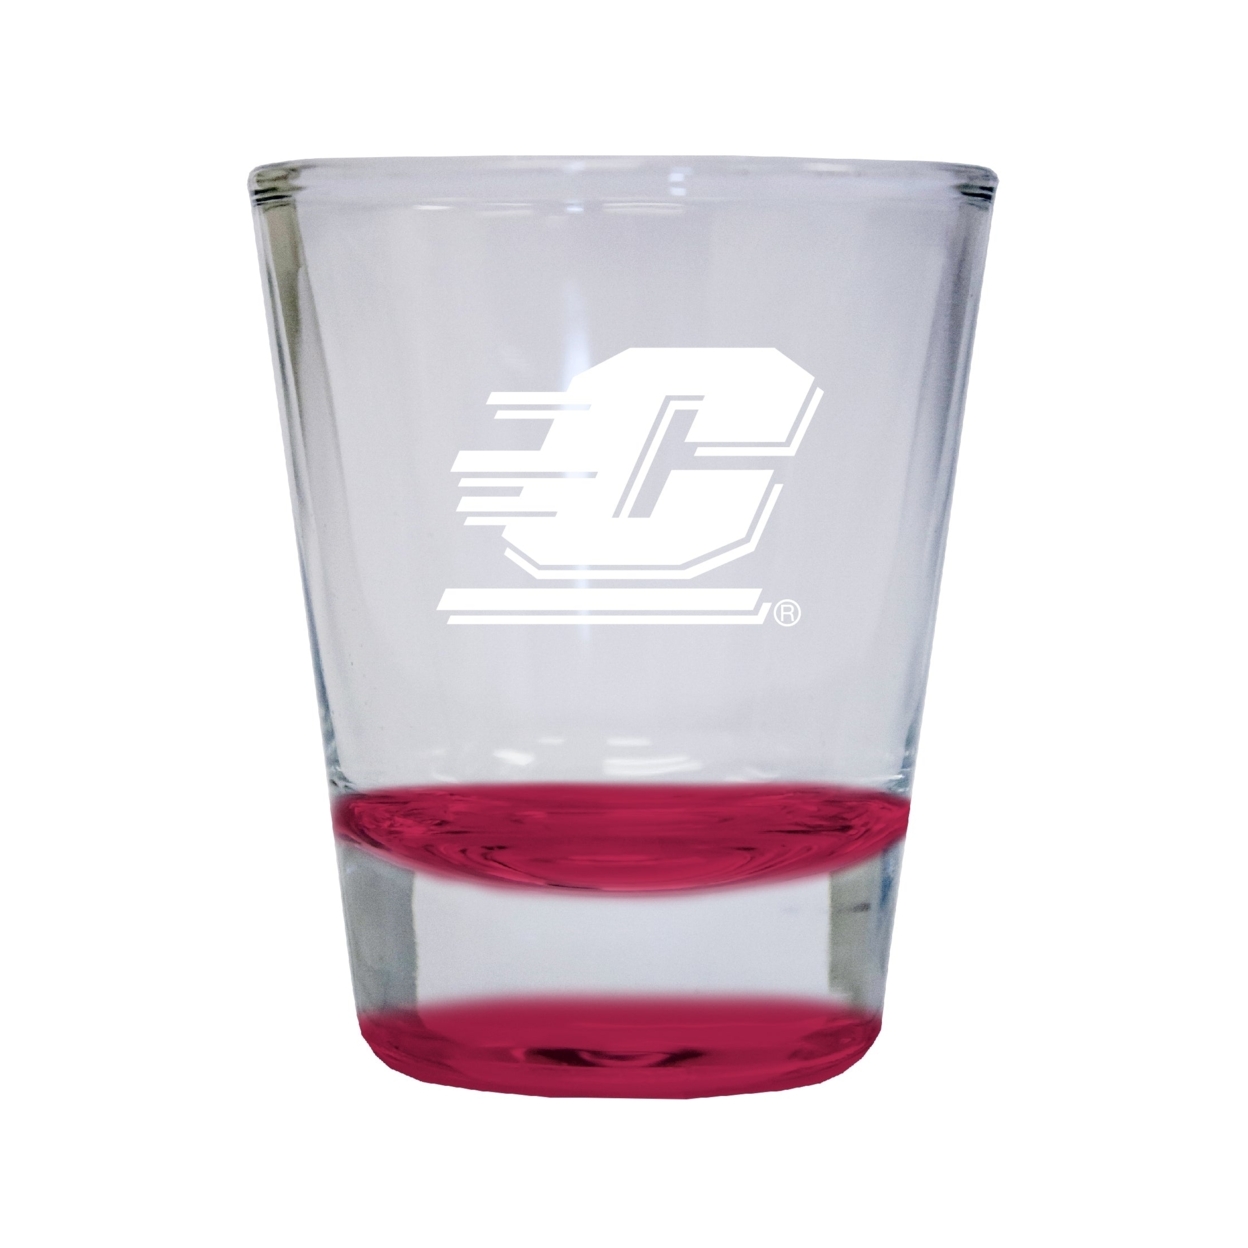 Central Michigan University Etched Round Shot Glass 2 Oz Red